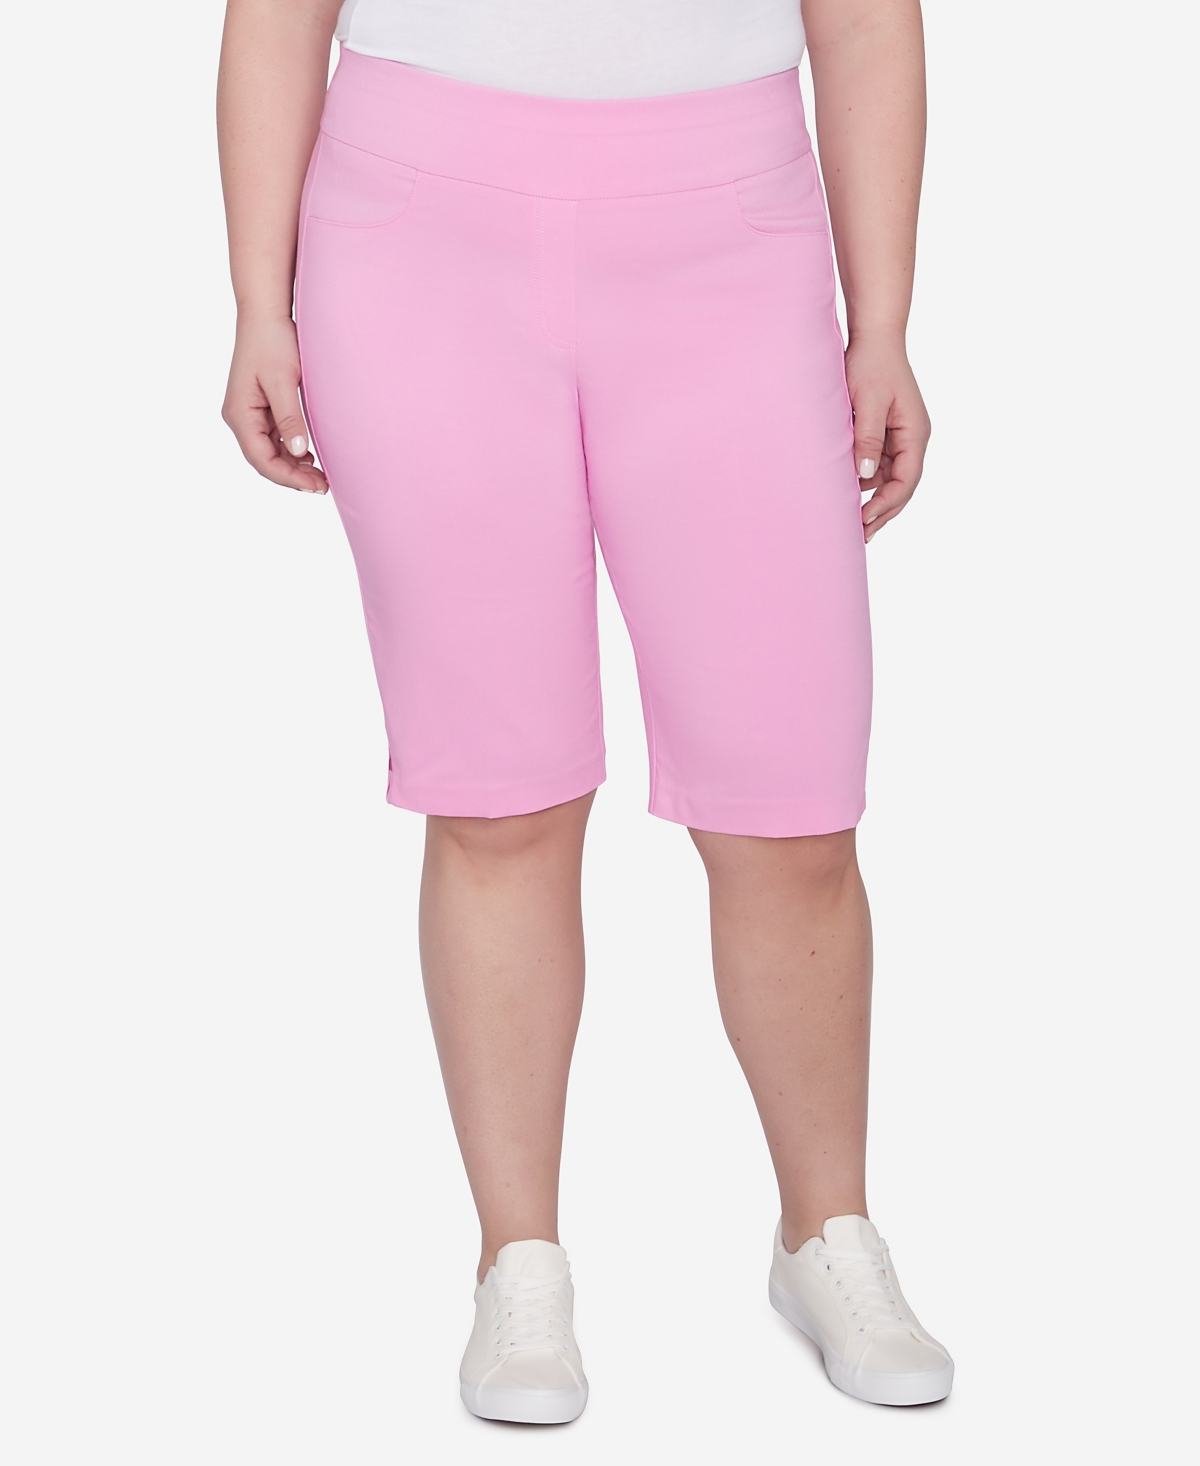 Plus Size Spring into Action Solid Tech Stretch Skimmer Pant - Wisteria